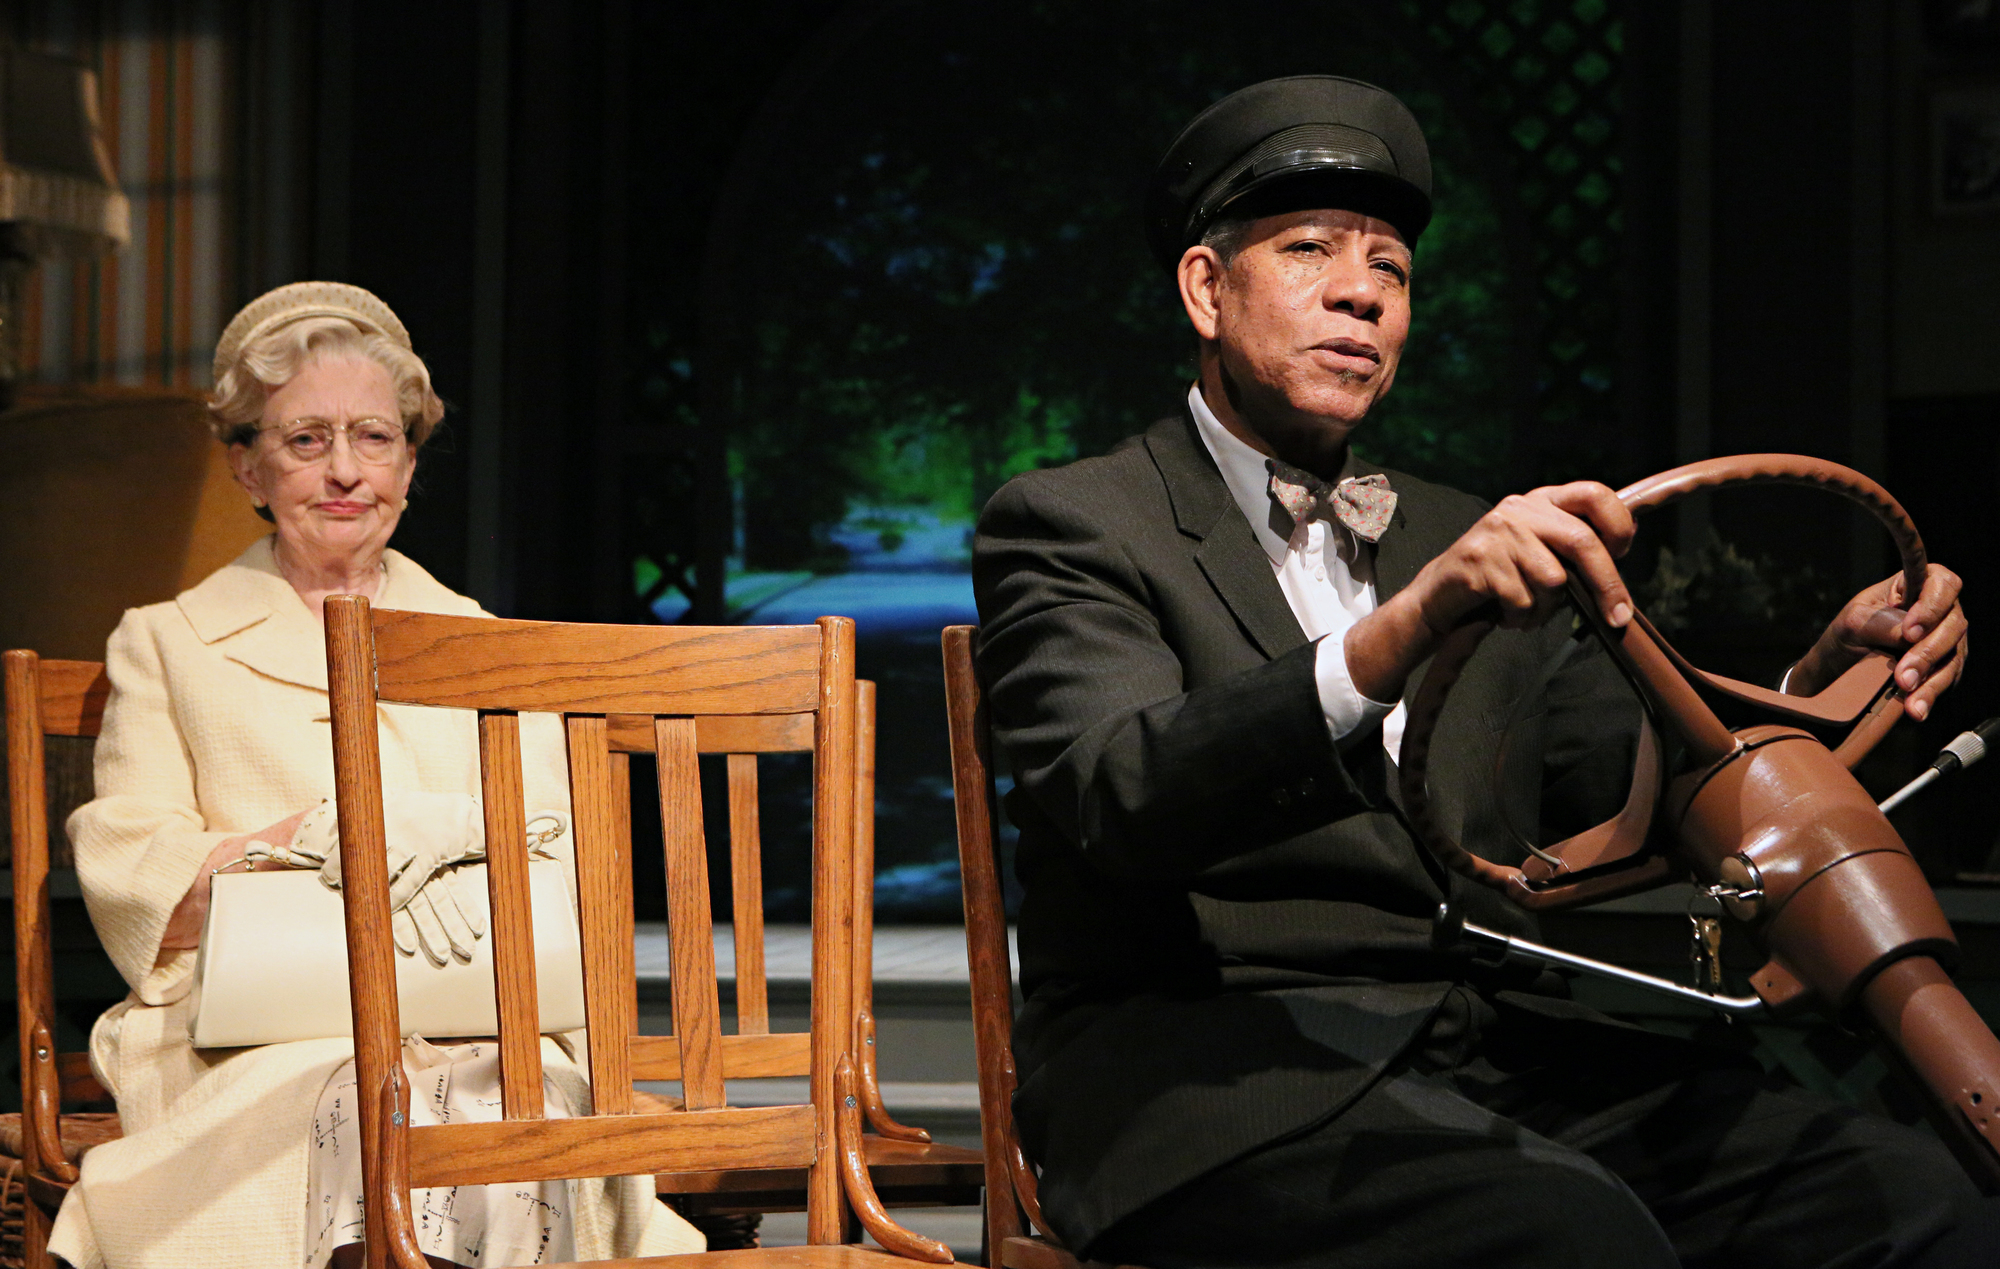 Driving Miss Daisy Backgrounds, Compatible - PC, Mobile, Gadgets| 2000x1269 px